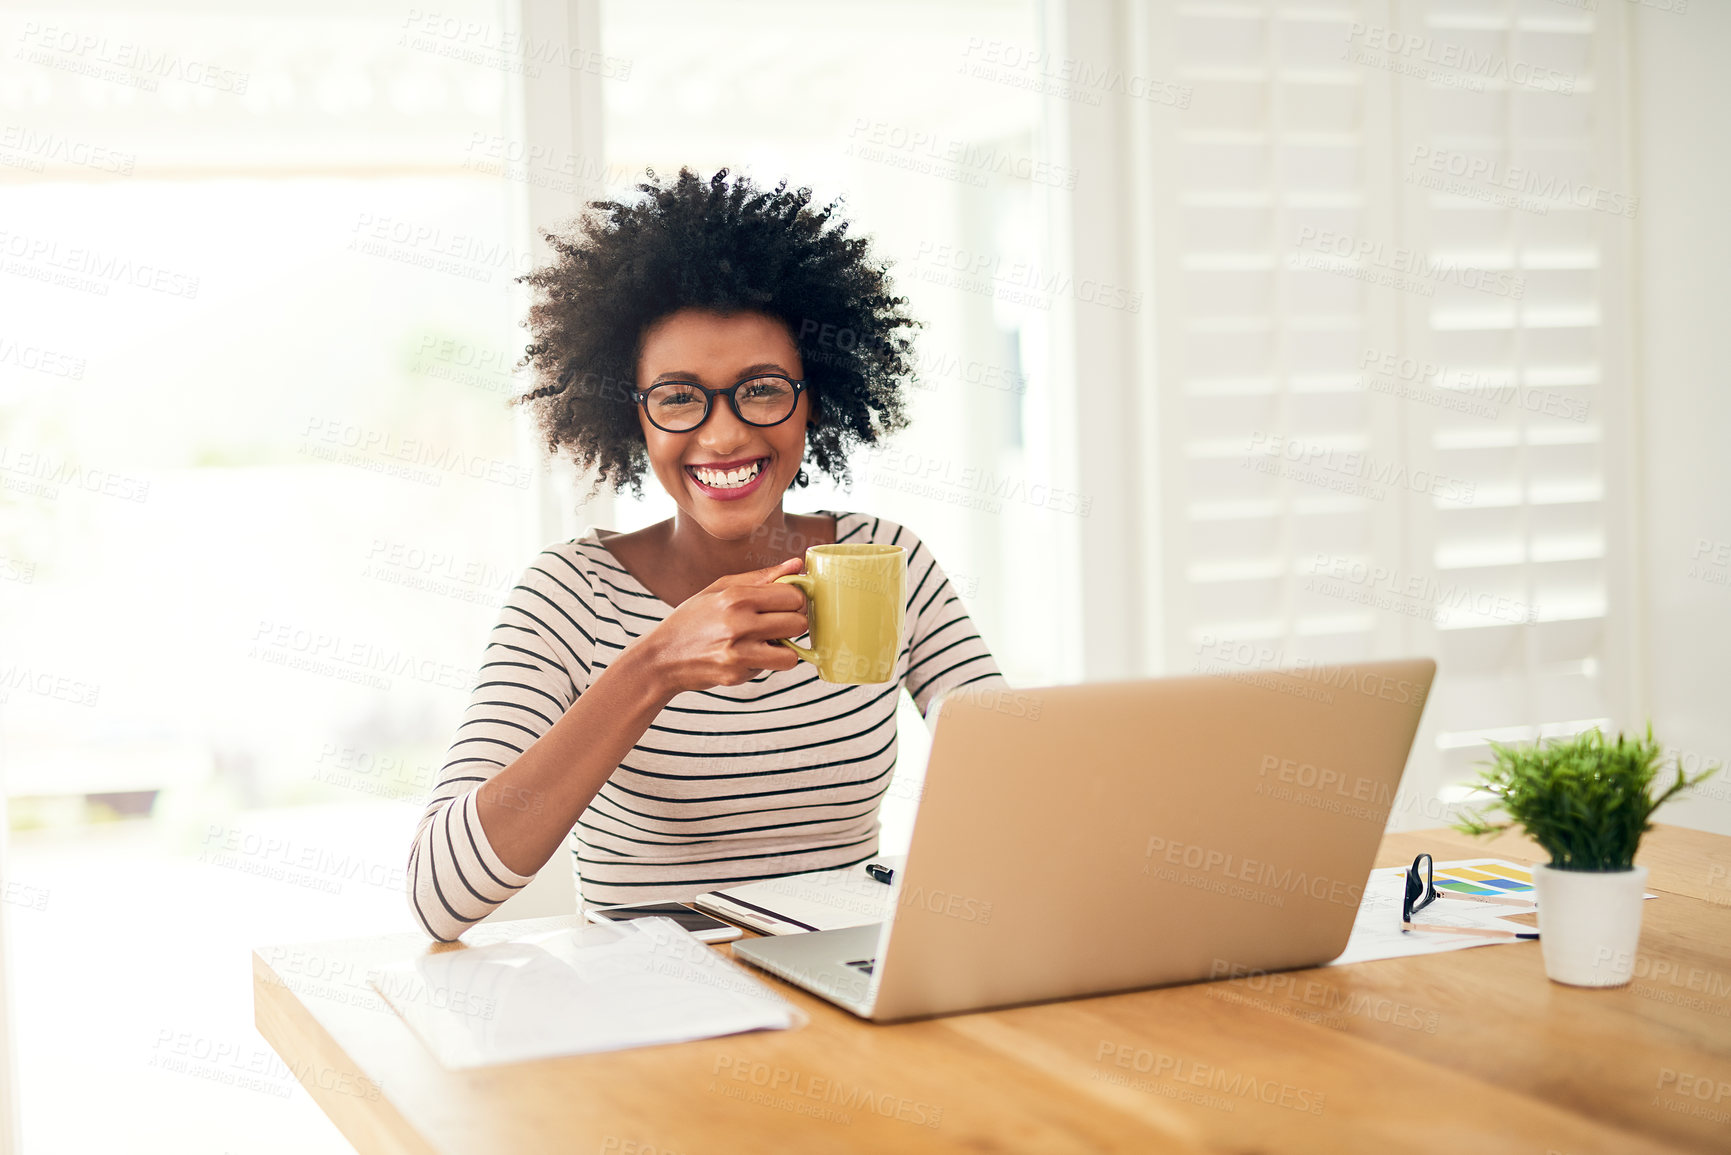 Buy stock photo Portrait of a young woman drinking coffee while working on her laptop at home